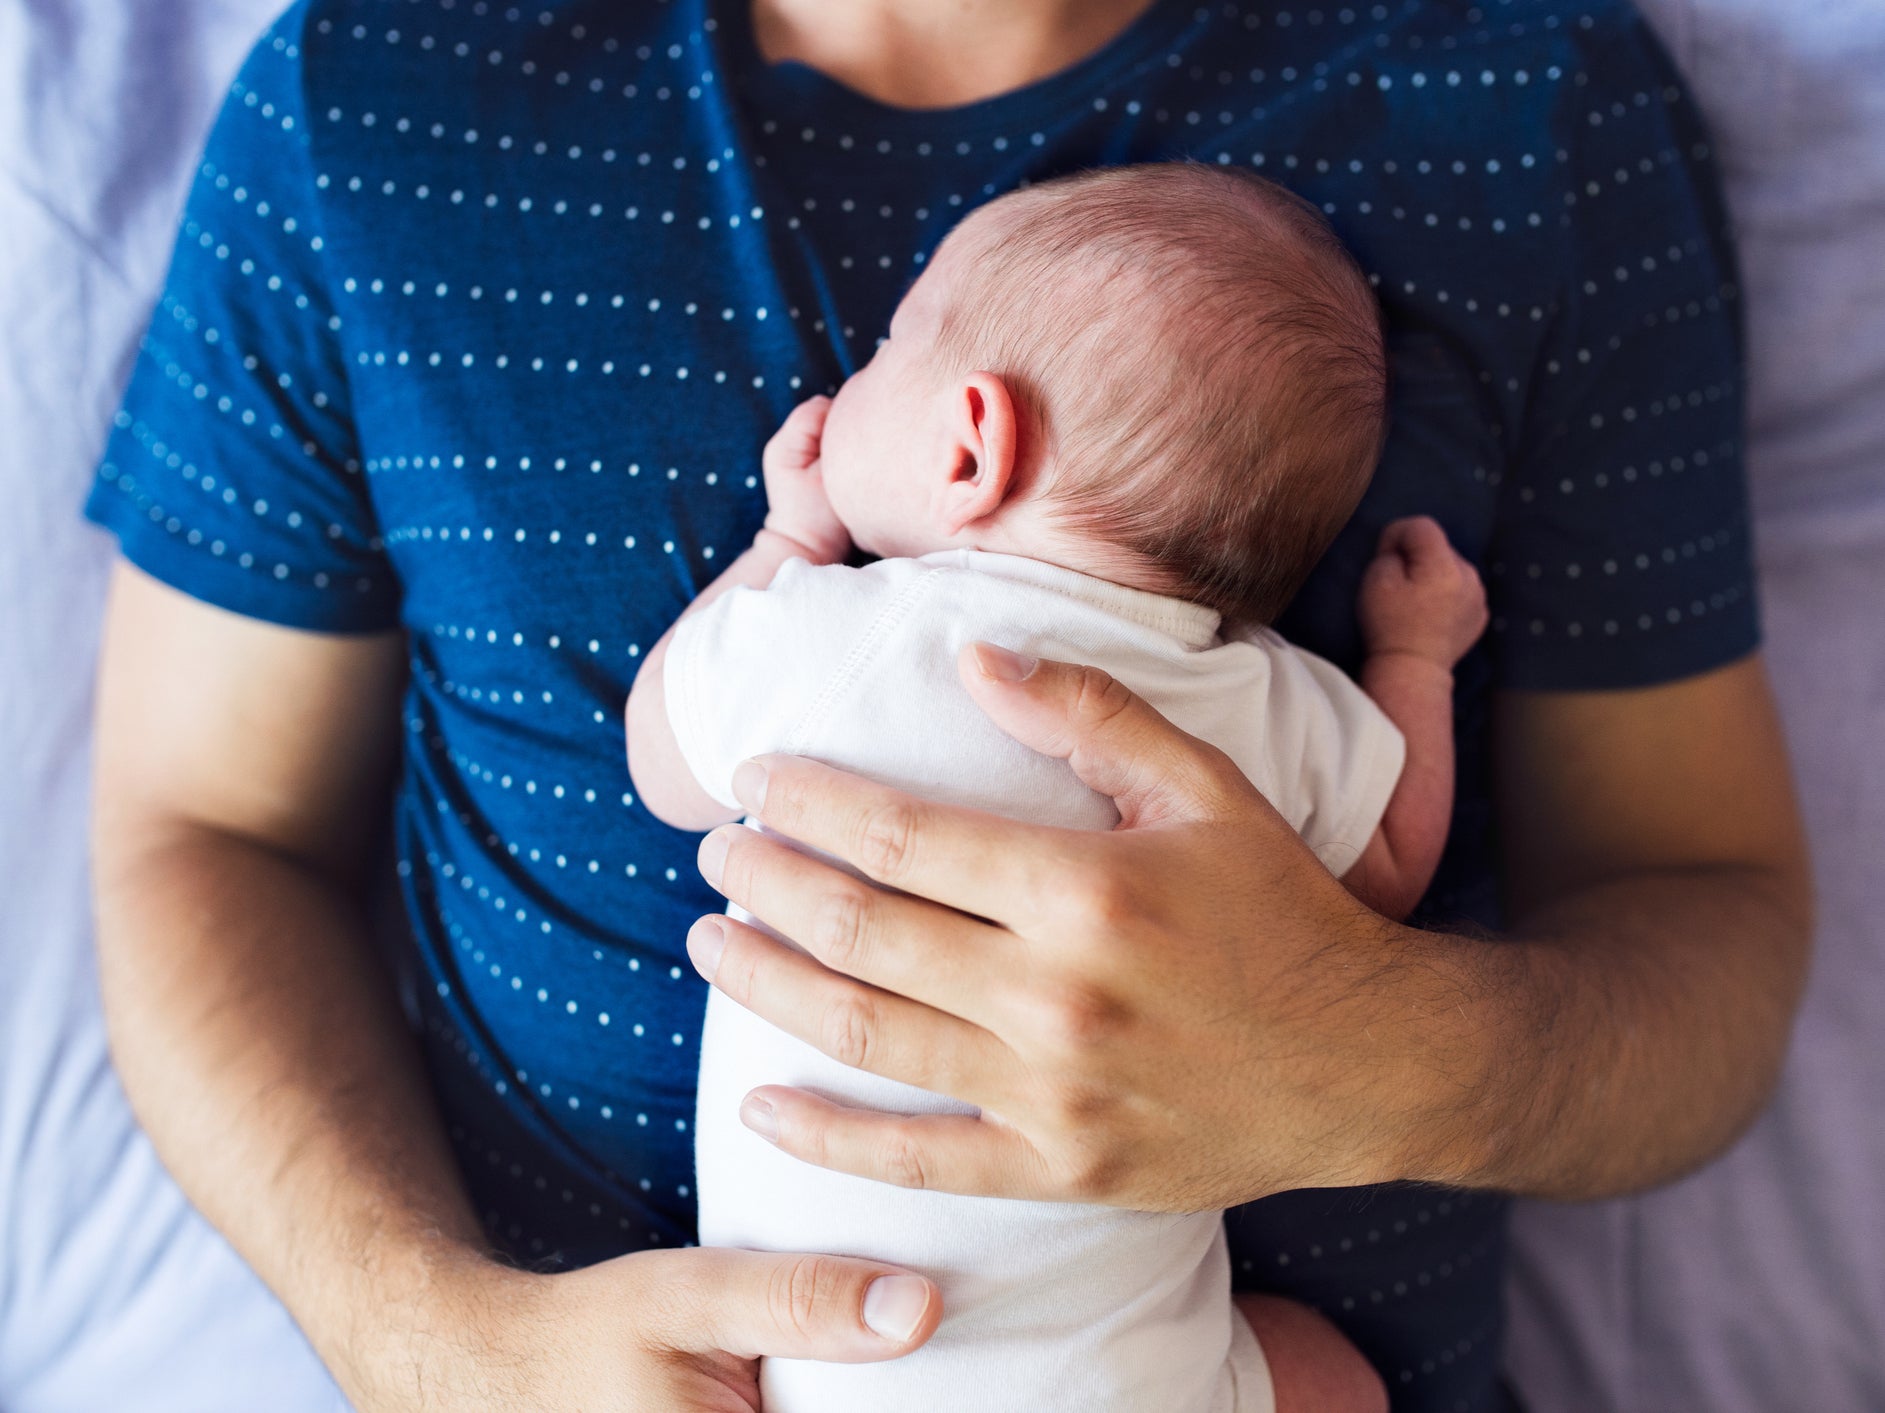 Research has found that men’s brains change after becoming fathers, with the milestone resulting in neurological developments